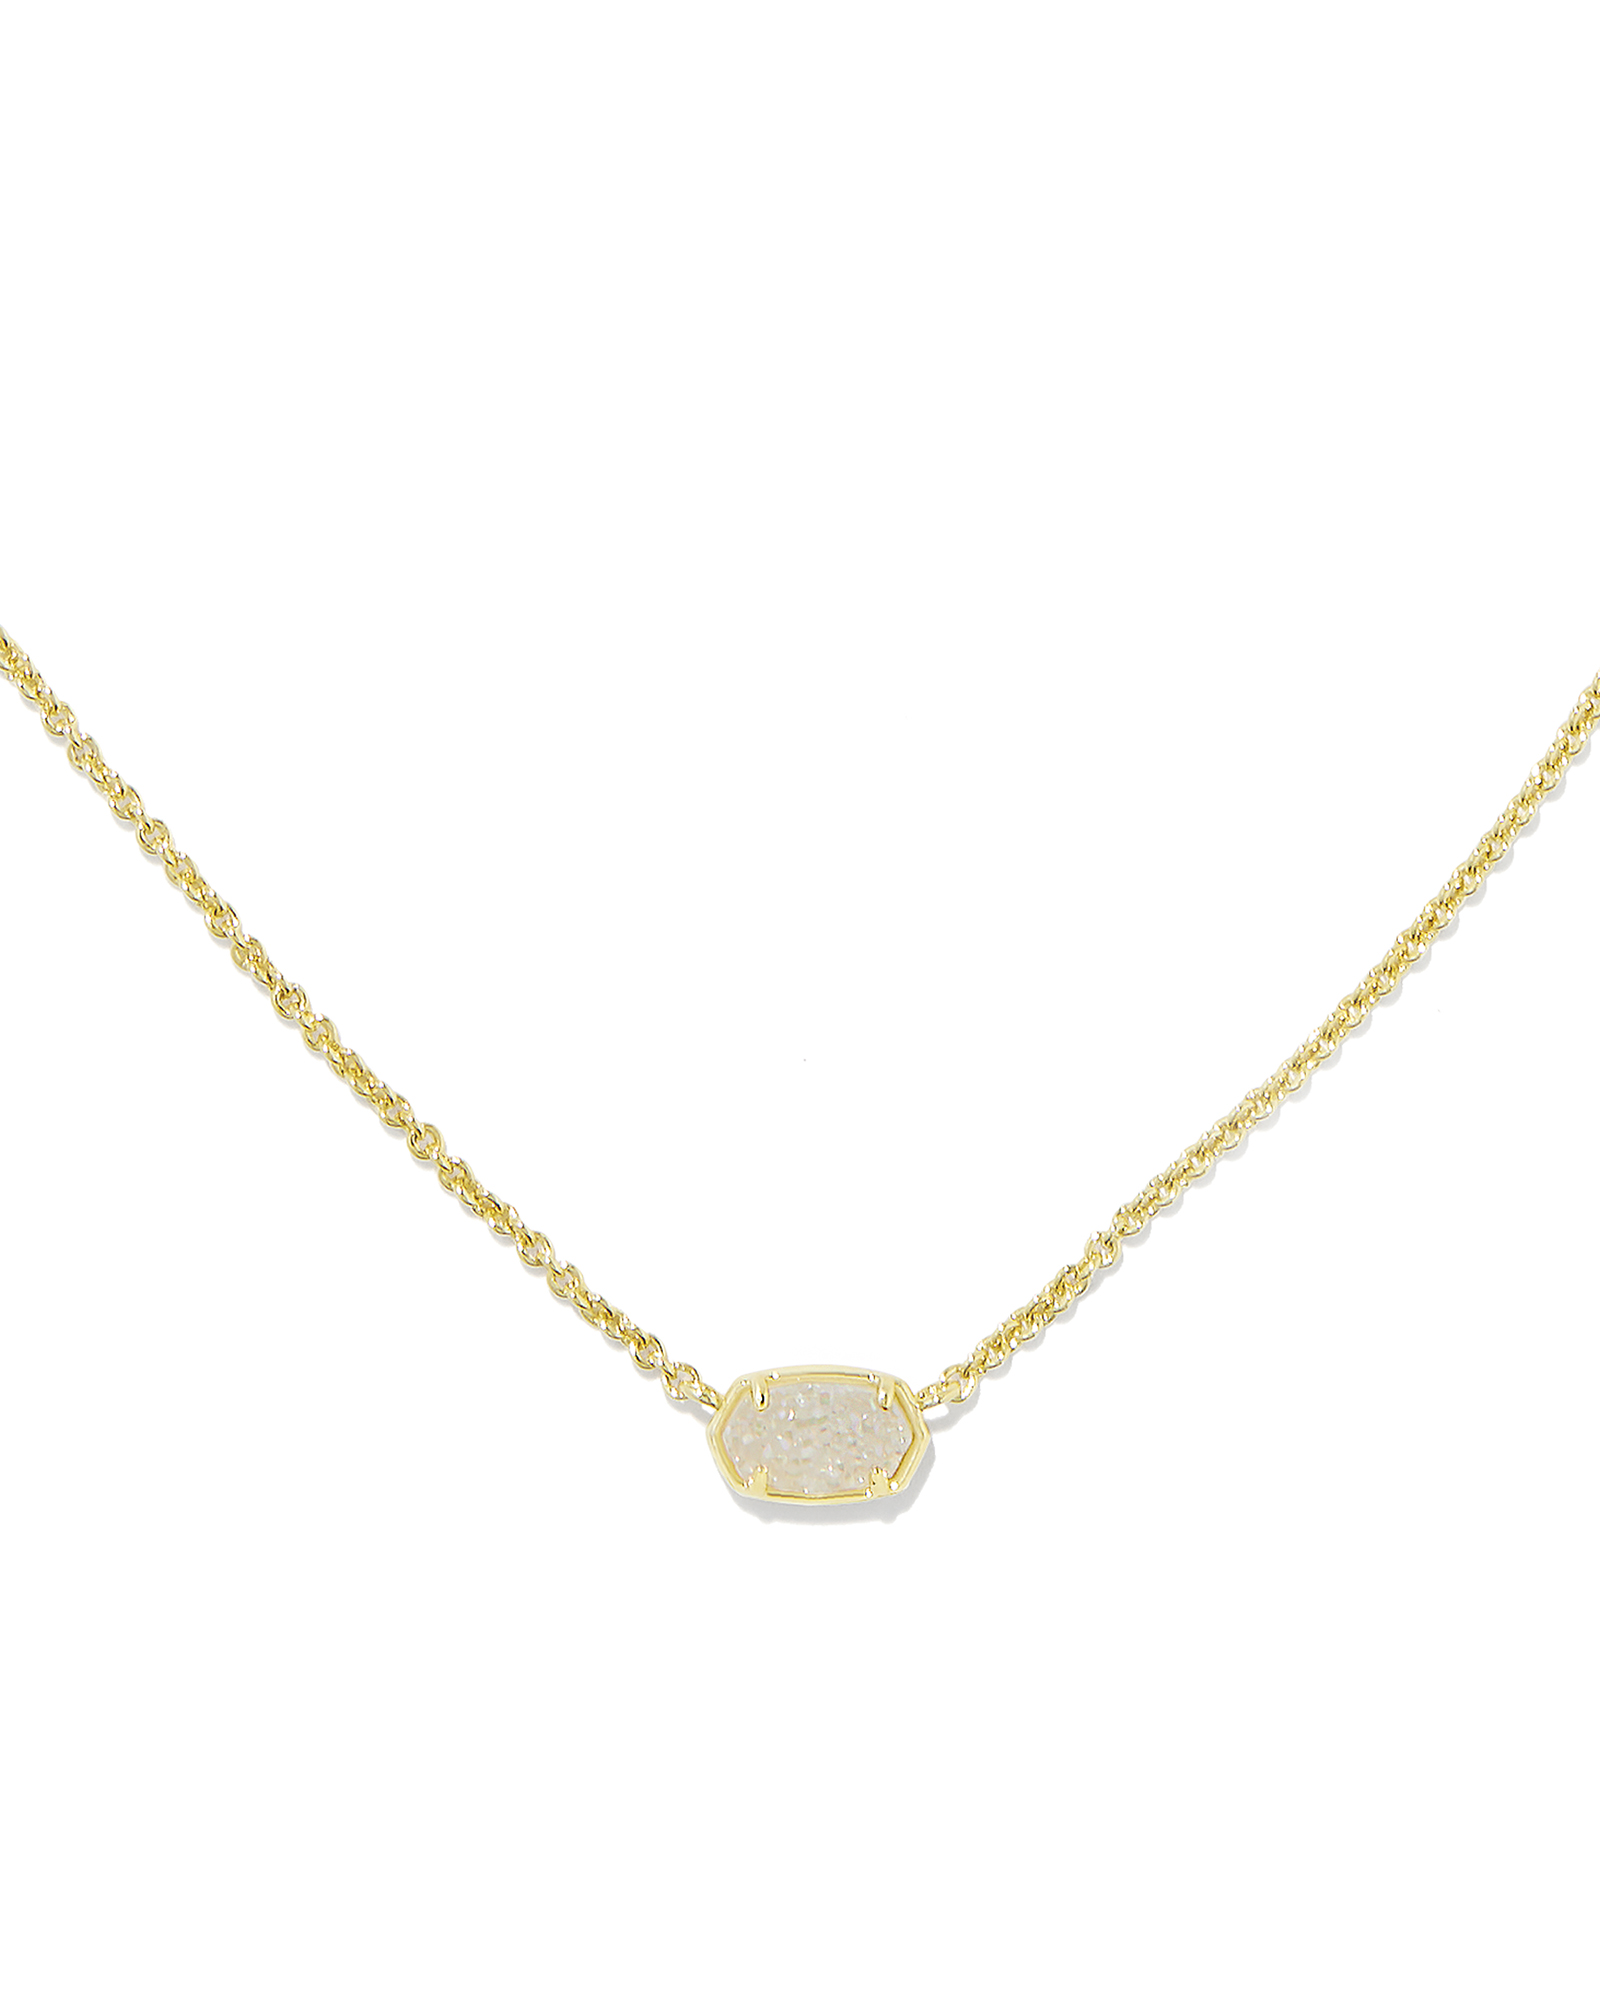 Anti-tarnish Jewellery | 18 k gold plated waterproof necklace – RosyWine